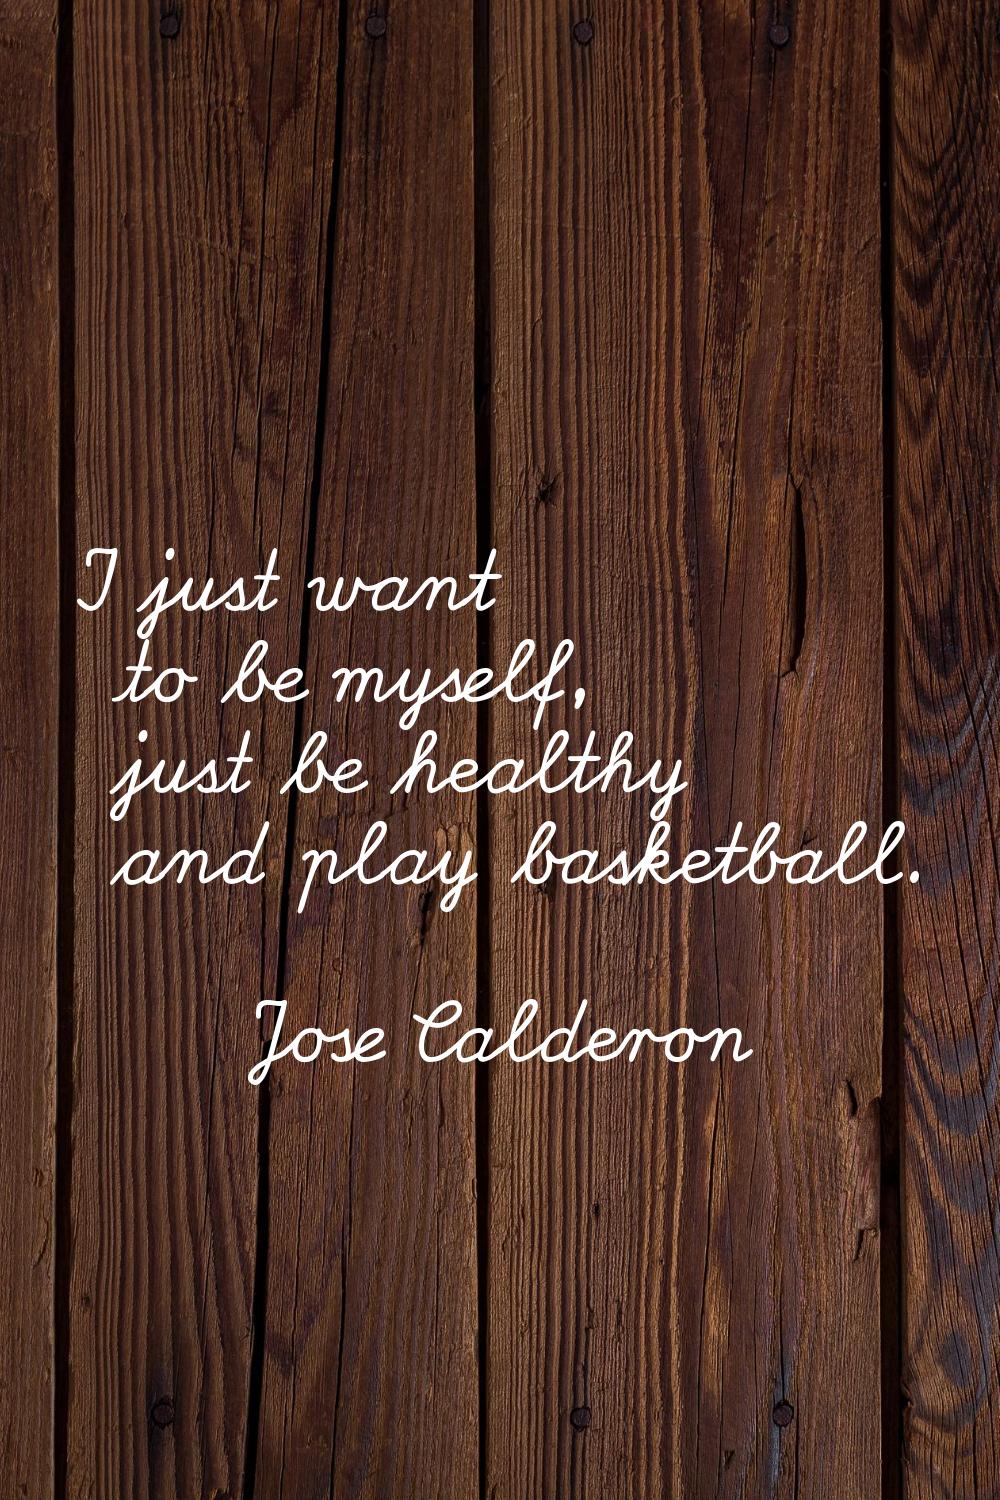 I just want to be myself, just be healthy and play basketball.